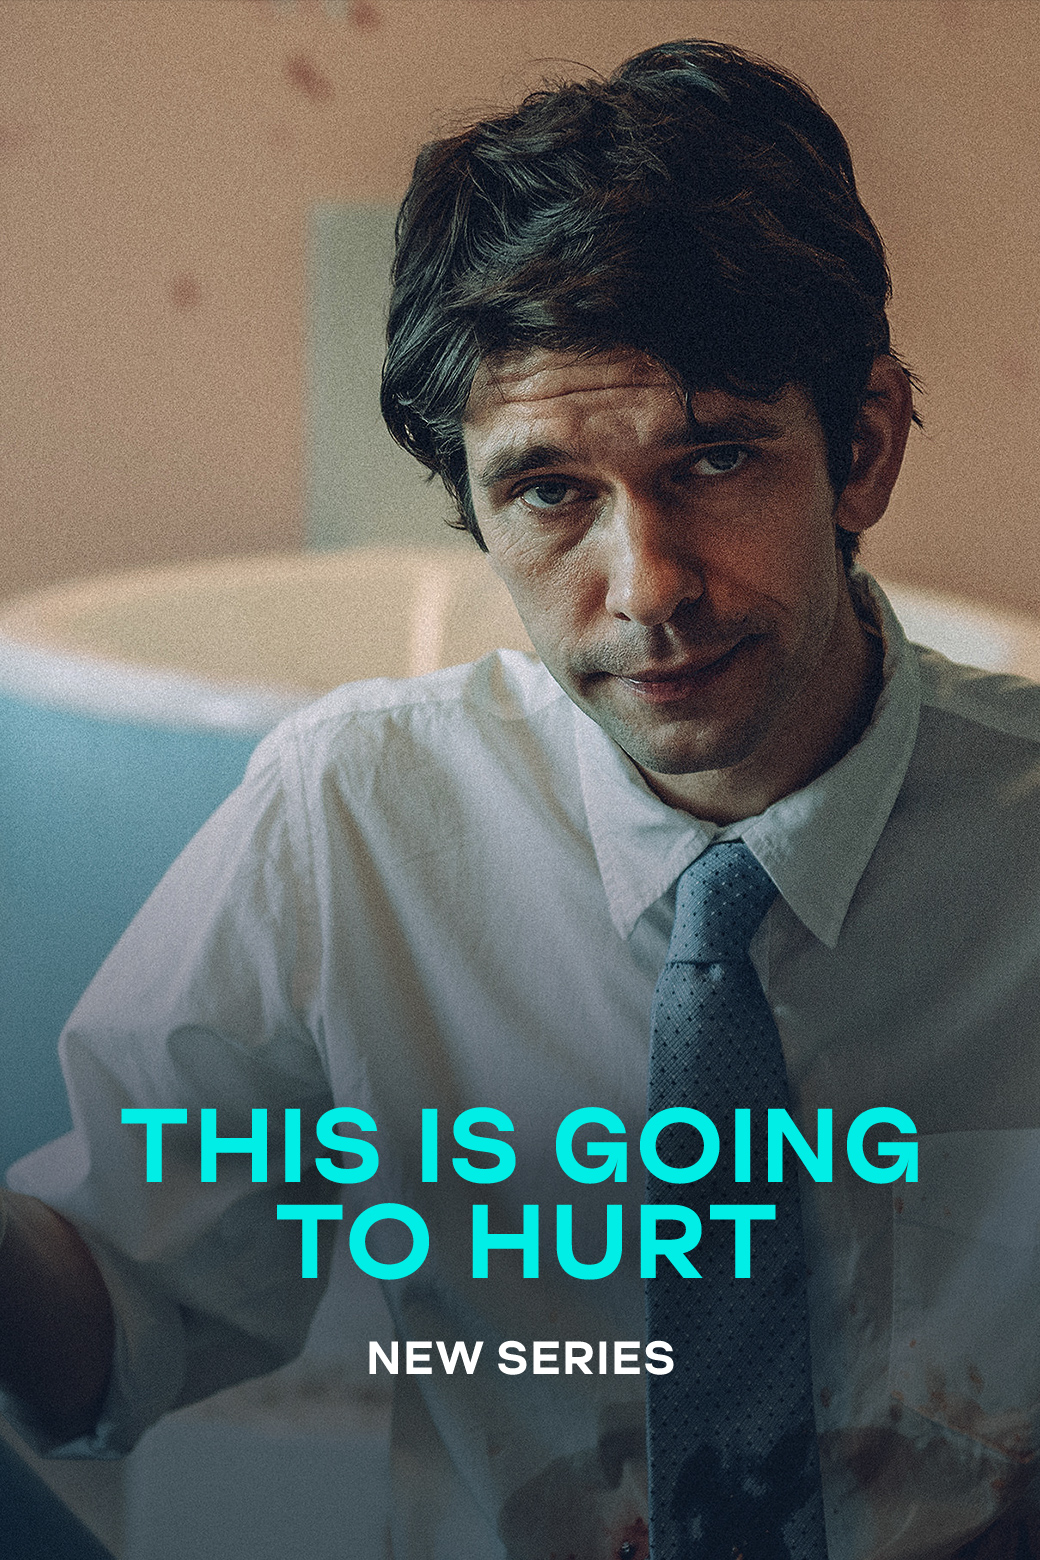 series_tms_SH000000000000_this-is-going-to-hurt-s1__img_poster_2x3_v01